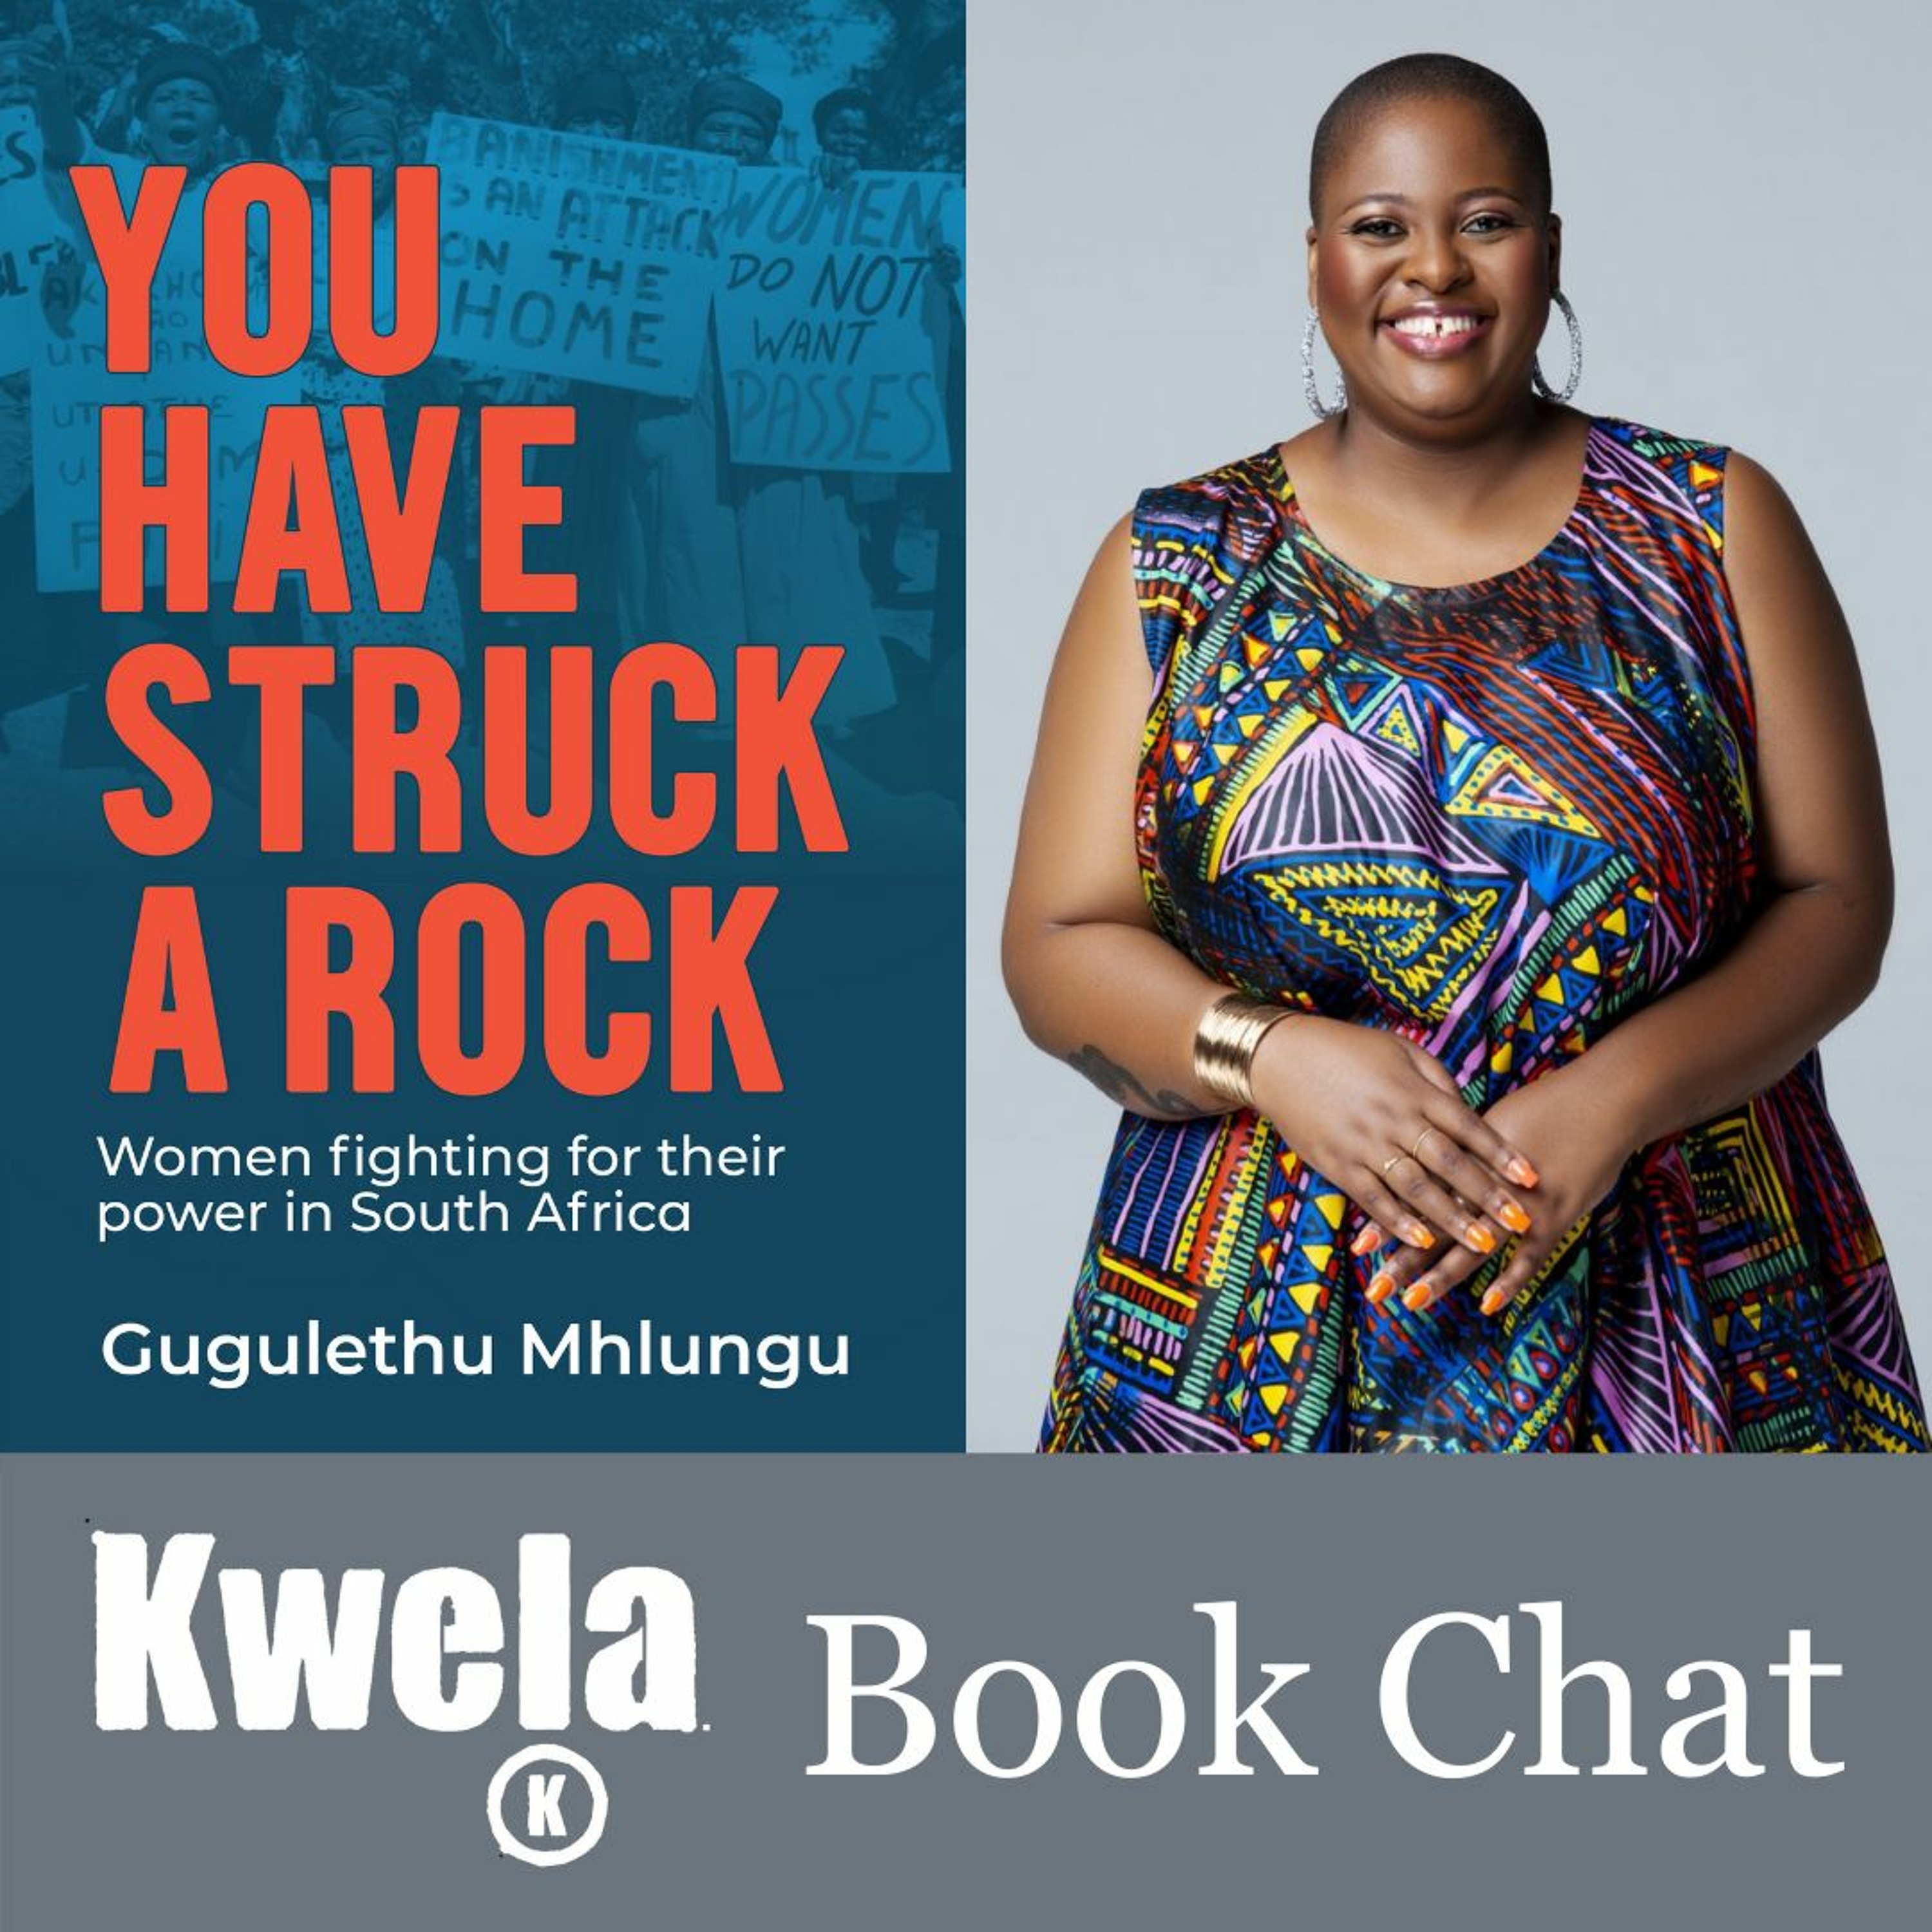 Kwela Book Chat: You Have Struck a Rock by Gugulethu Mhlungu with Danielle Bowler